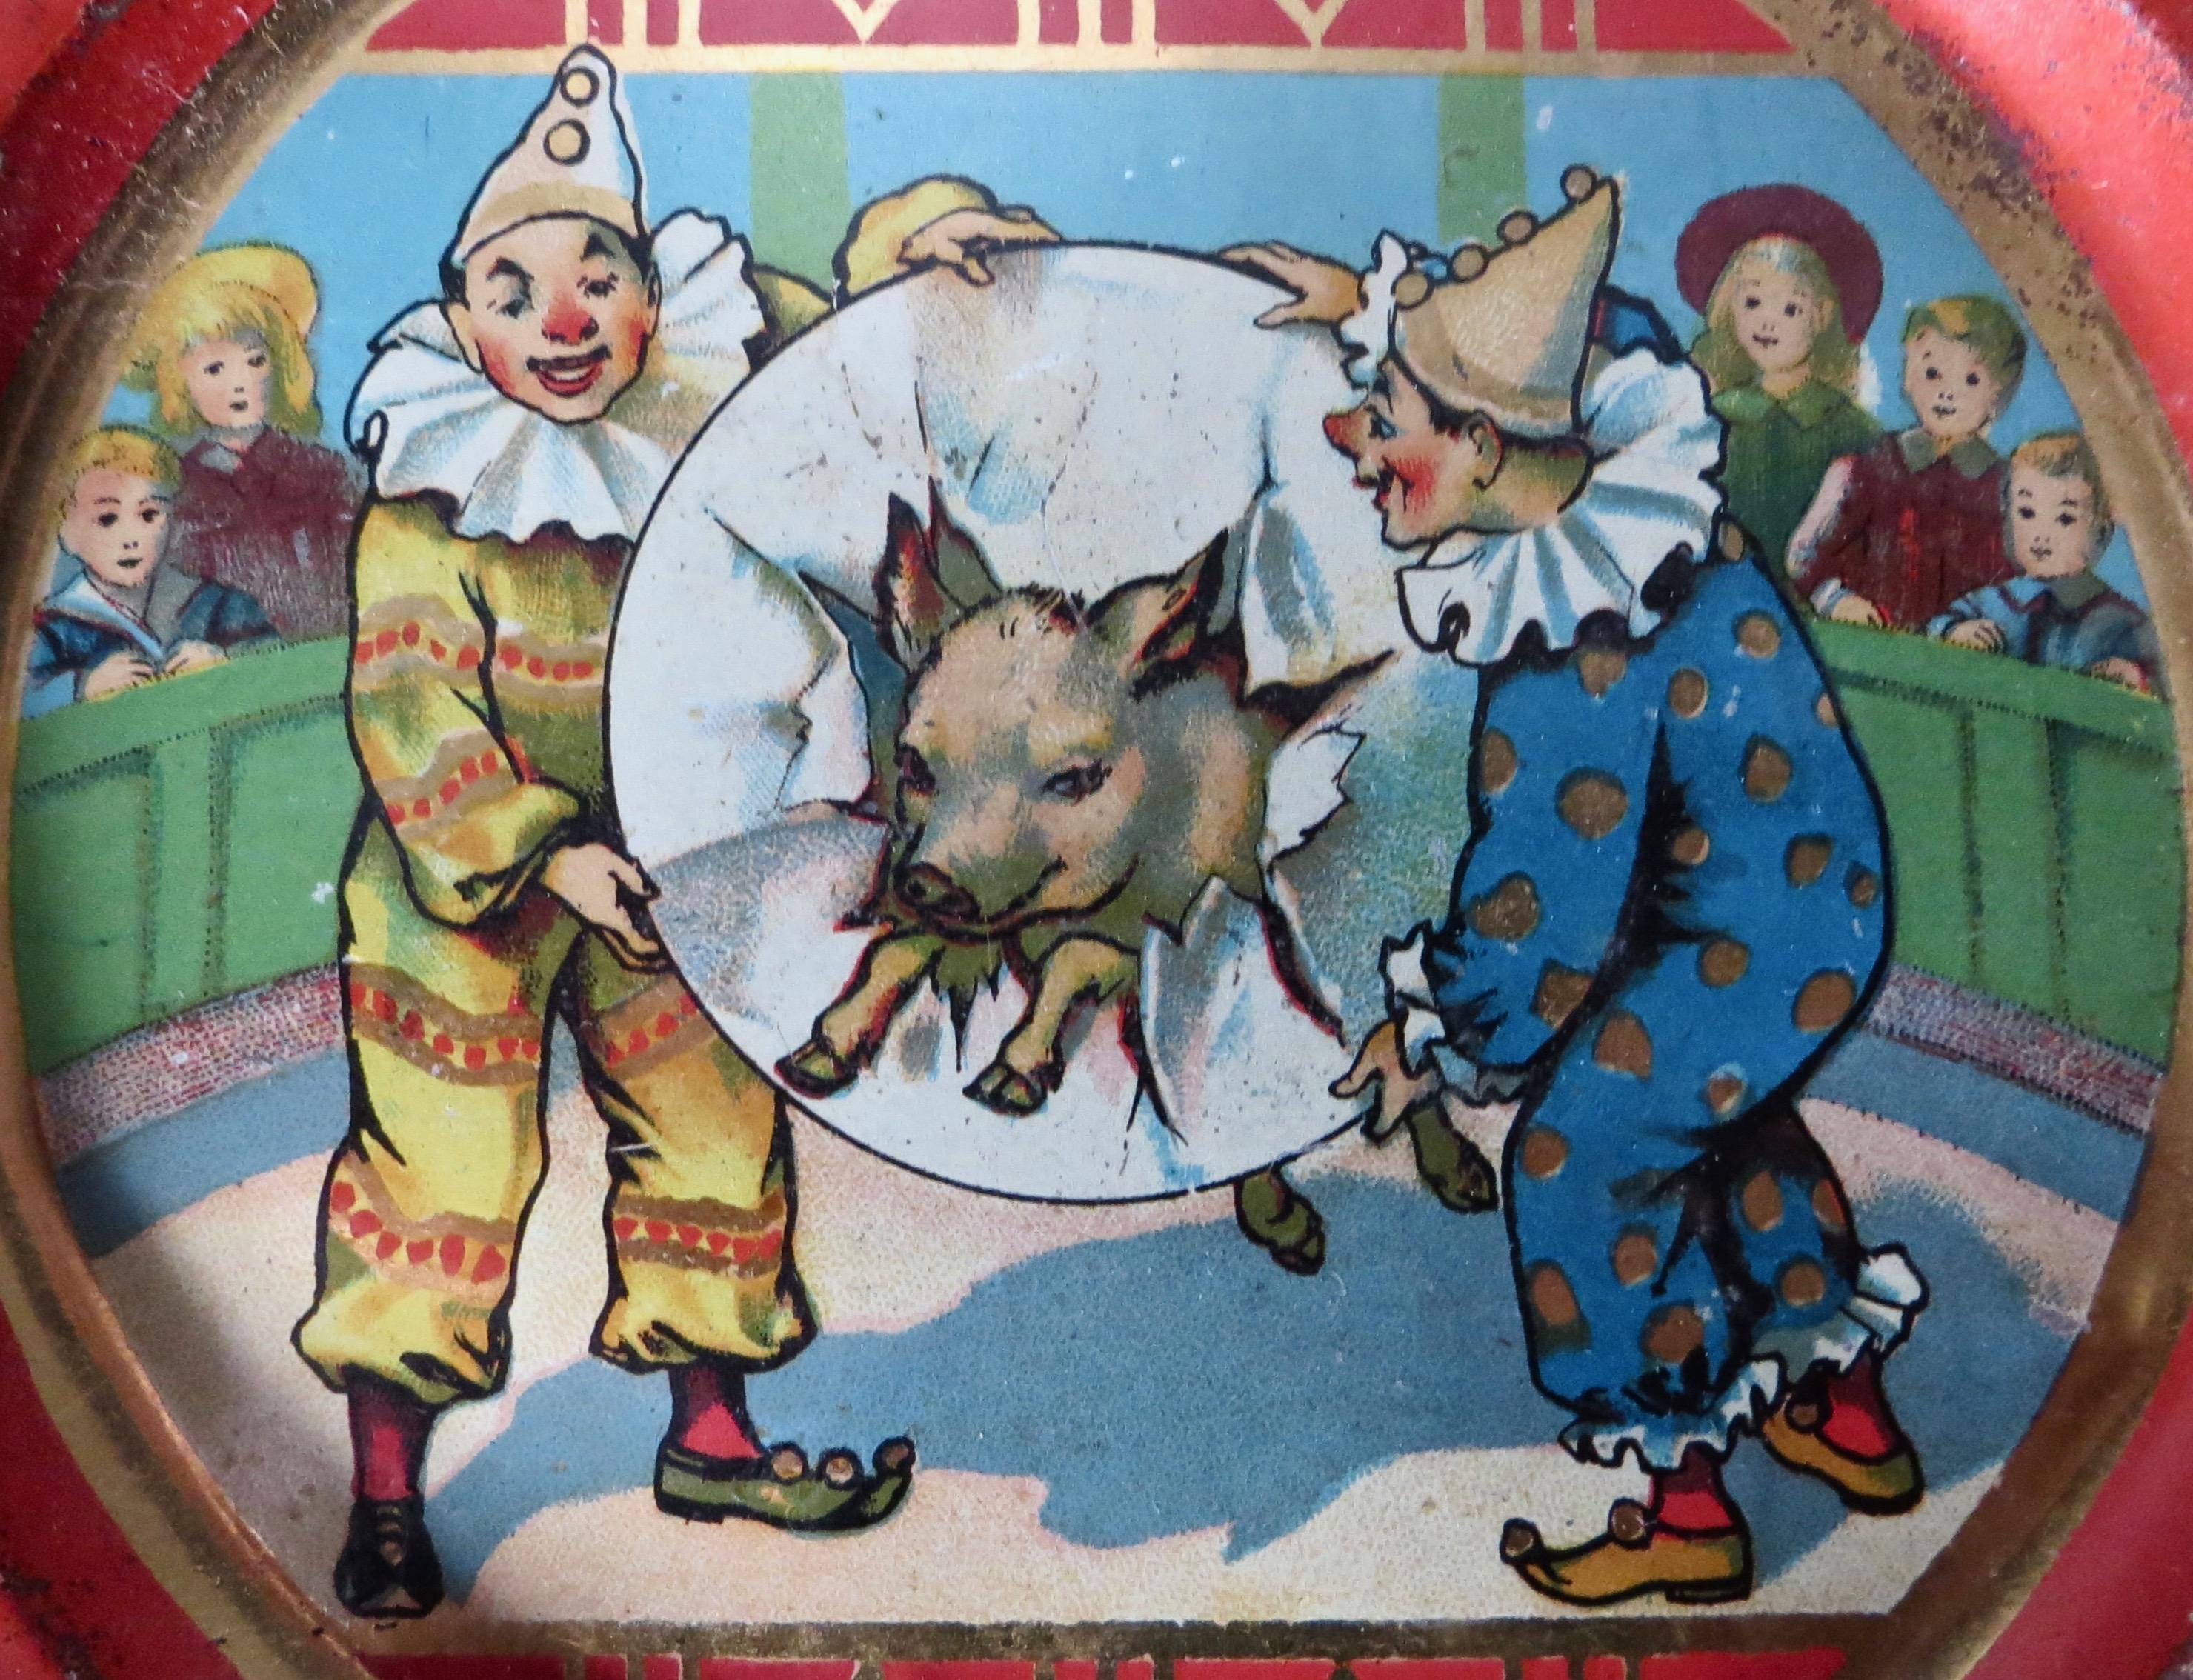 Saloon or soda fountain pressed steel tin tip tray; circa 1910 with whimsical theme showing a pig jumping through a paper covered hoop held by two colorfully dressed clowns, while spectators look on from behind the barrier. Excellent original